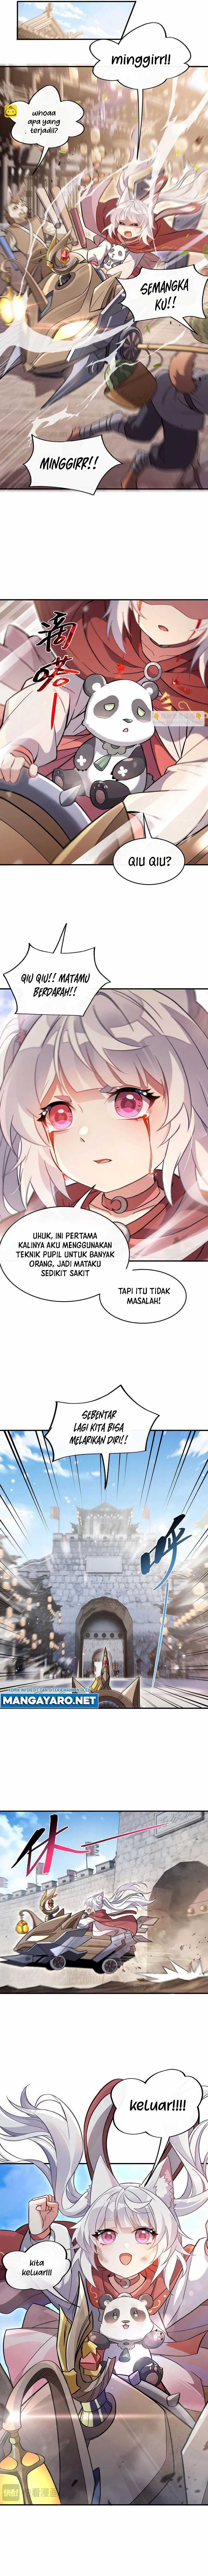 Dilarang COPAS - situs resmi www.mangacanblog.com - Komik my female apprentices are all big shots from the future 216 - chapter 216 217 Indonesia my female apprentices are all big shots from the future 216 - chapter 216 Terbaru 7|Baca Manga Komik Indonesia|Mangacan